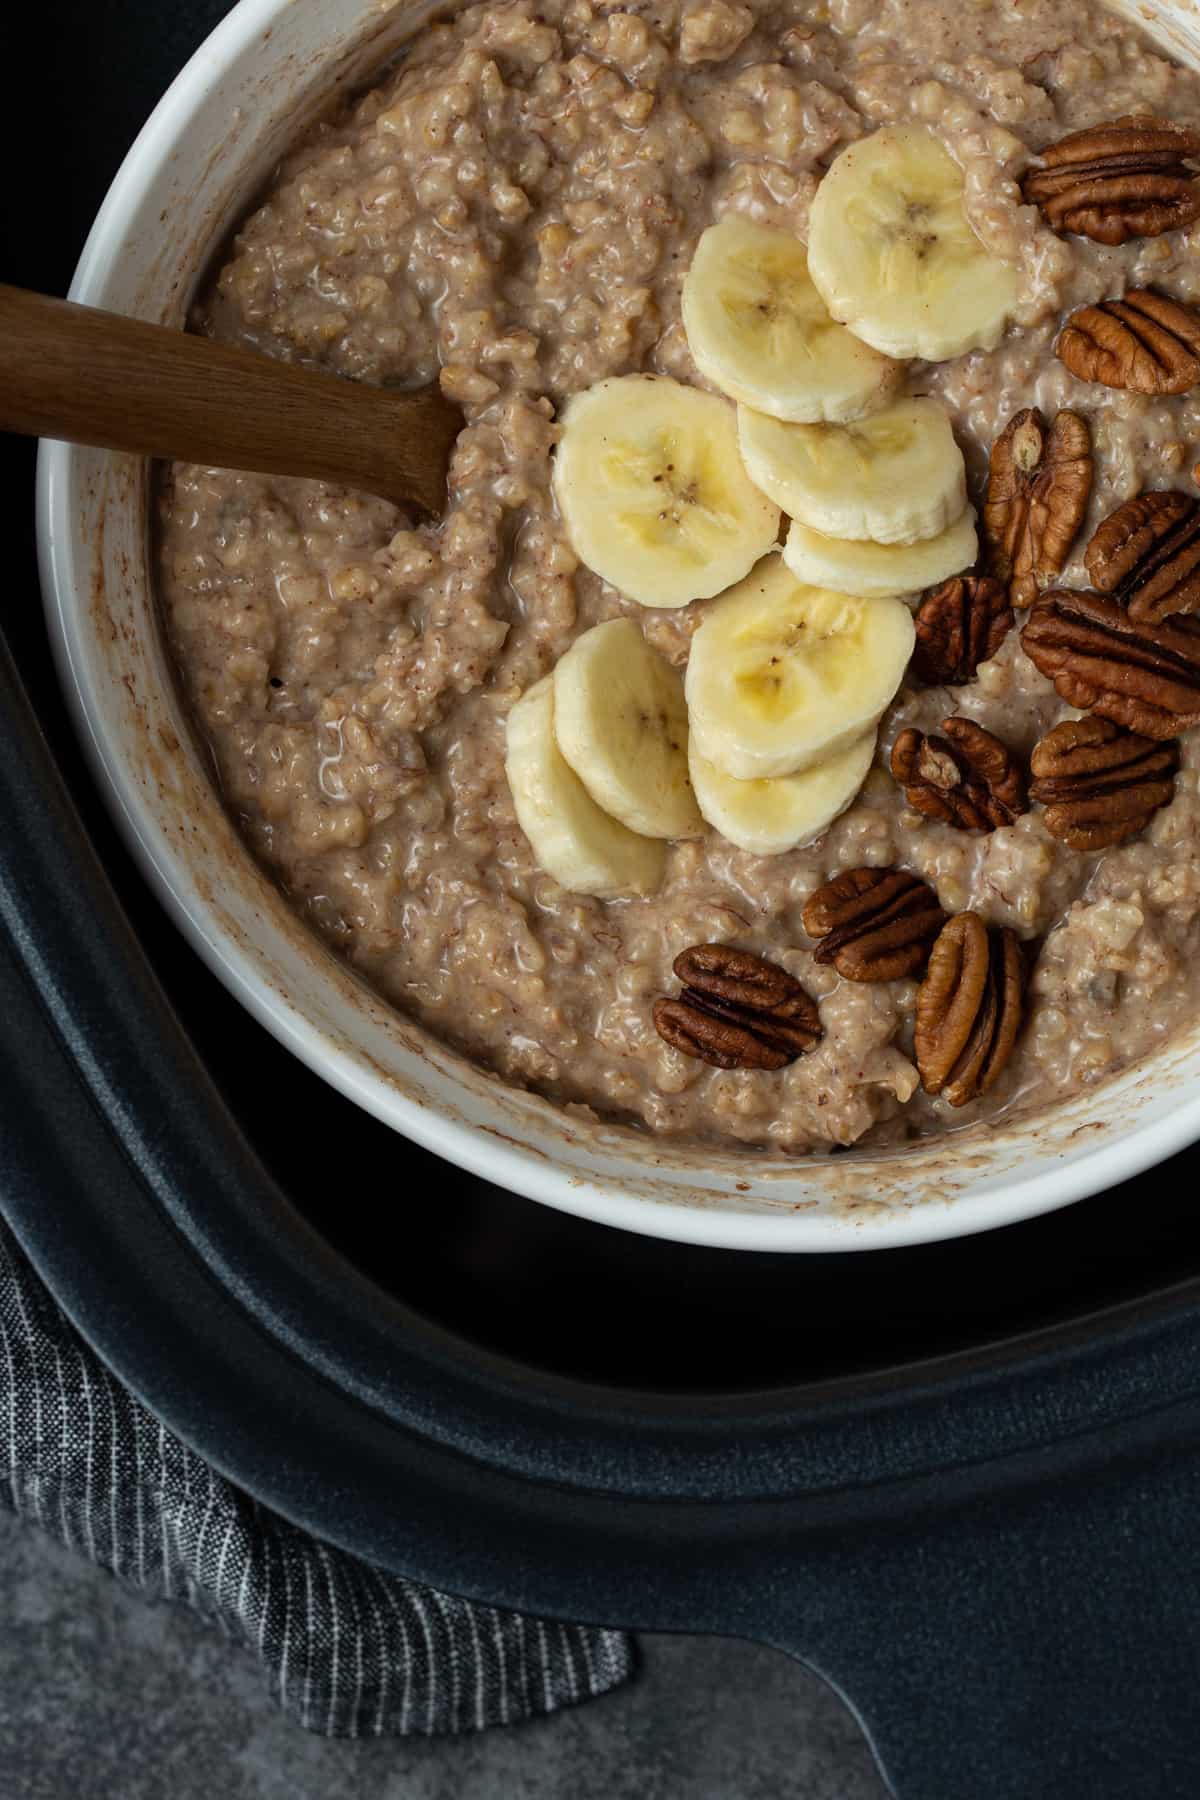 A large bowl of oatmeal in a slow cooker with bananas and pecans.